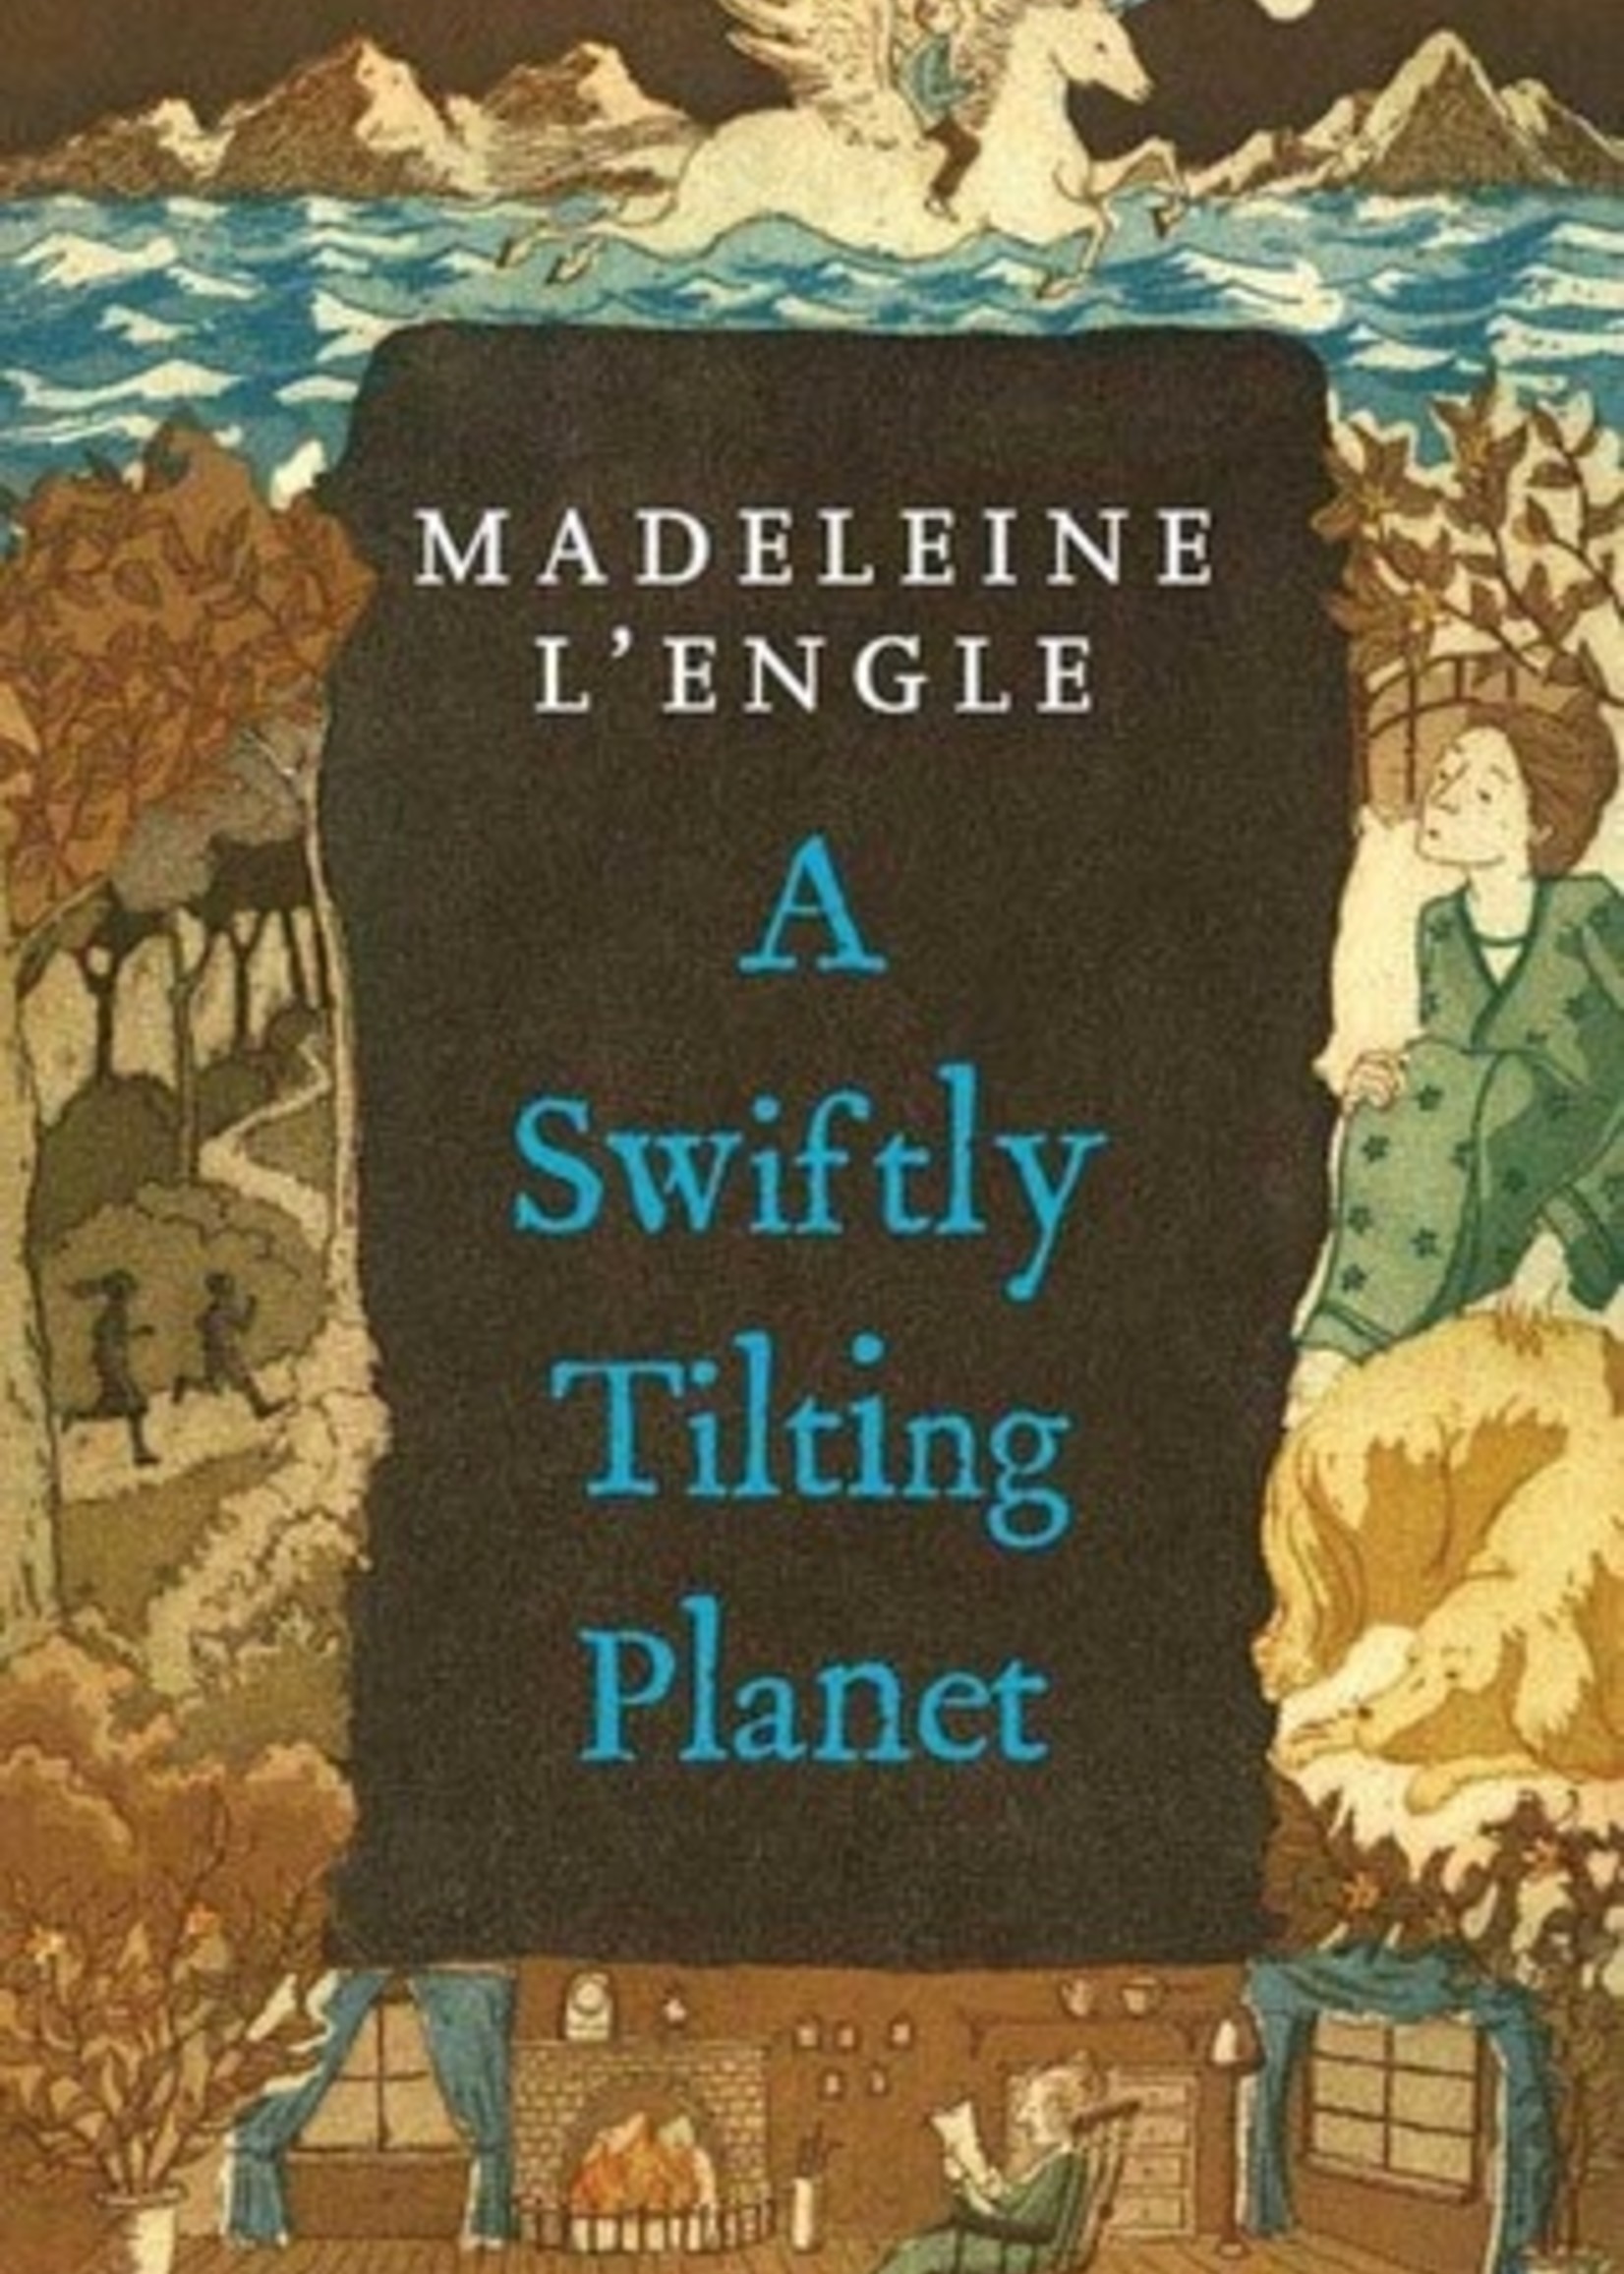 A Swiftly Tilting Planet (Time Quintet #3) by Madeleine L'Engle